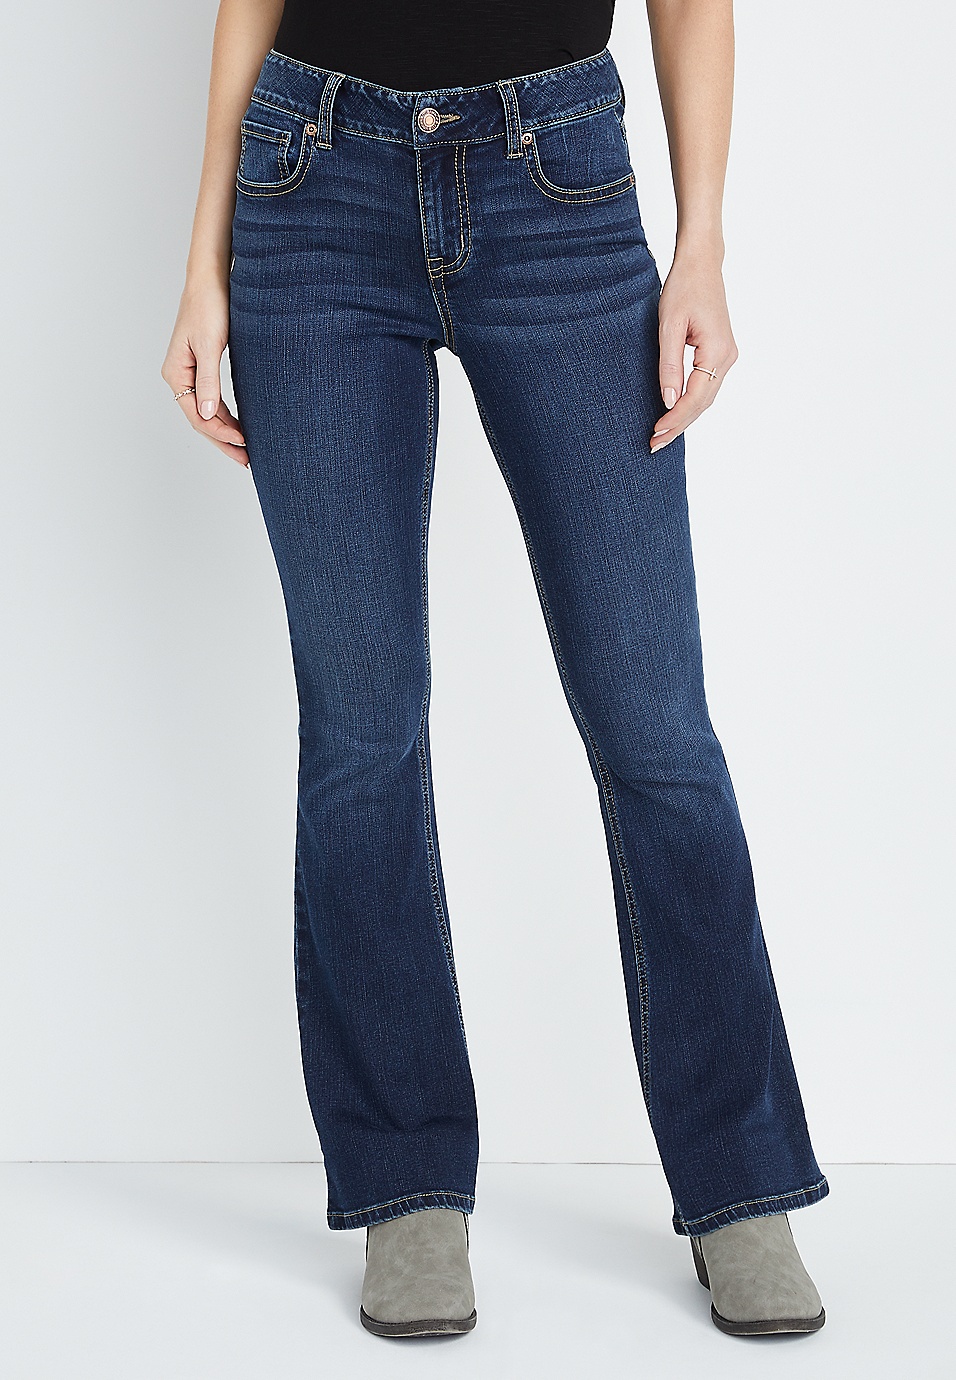 tragedie advies Canada m jeans by maurices™ Classic Flare Mid Rise Jean | maurices